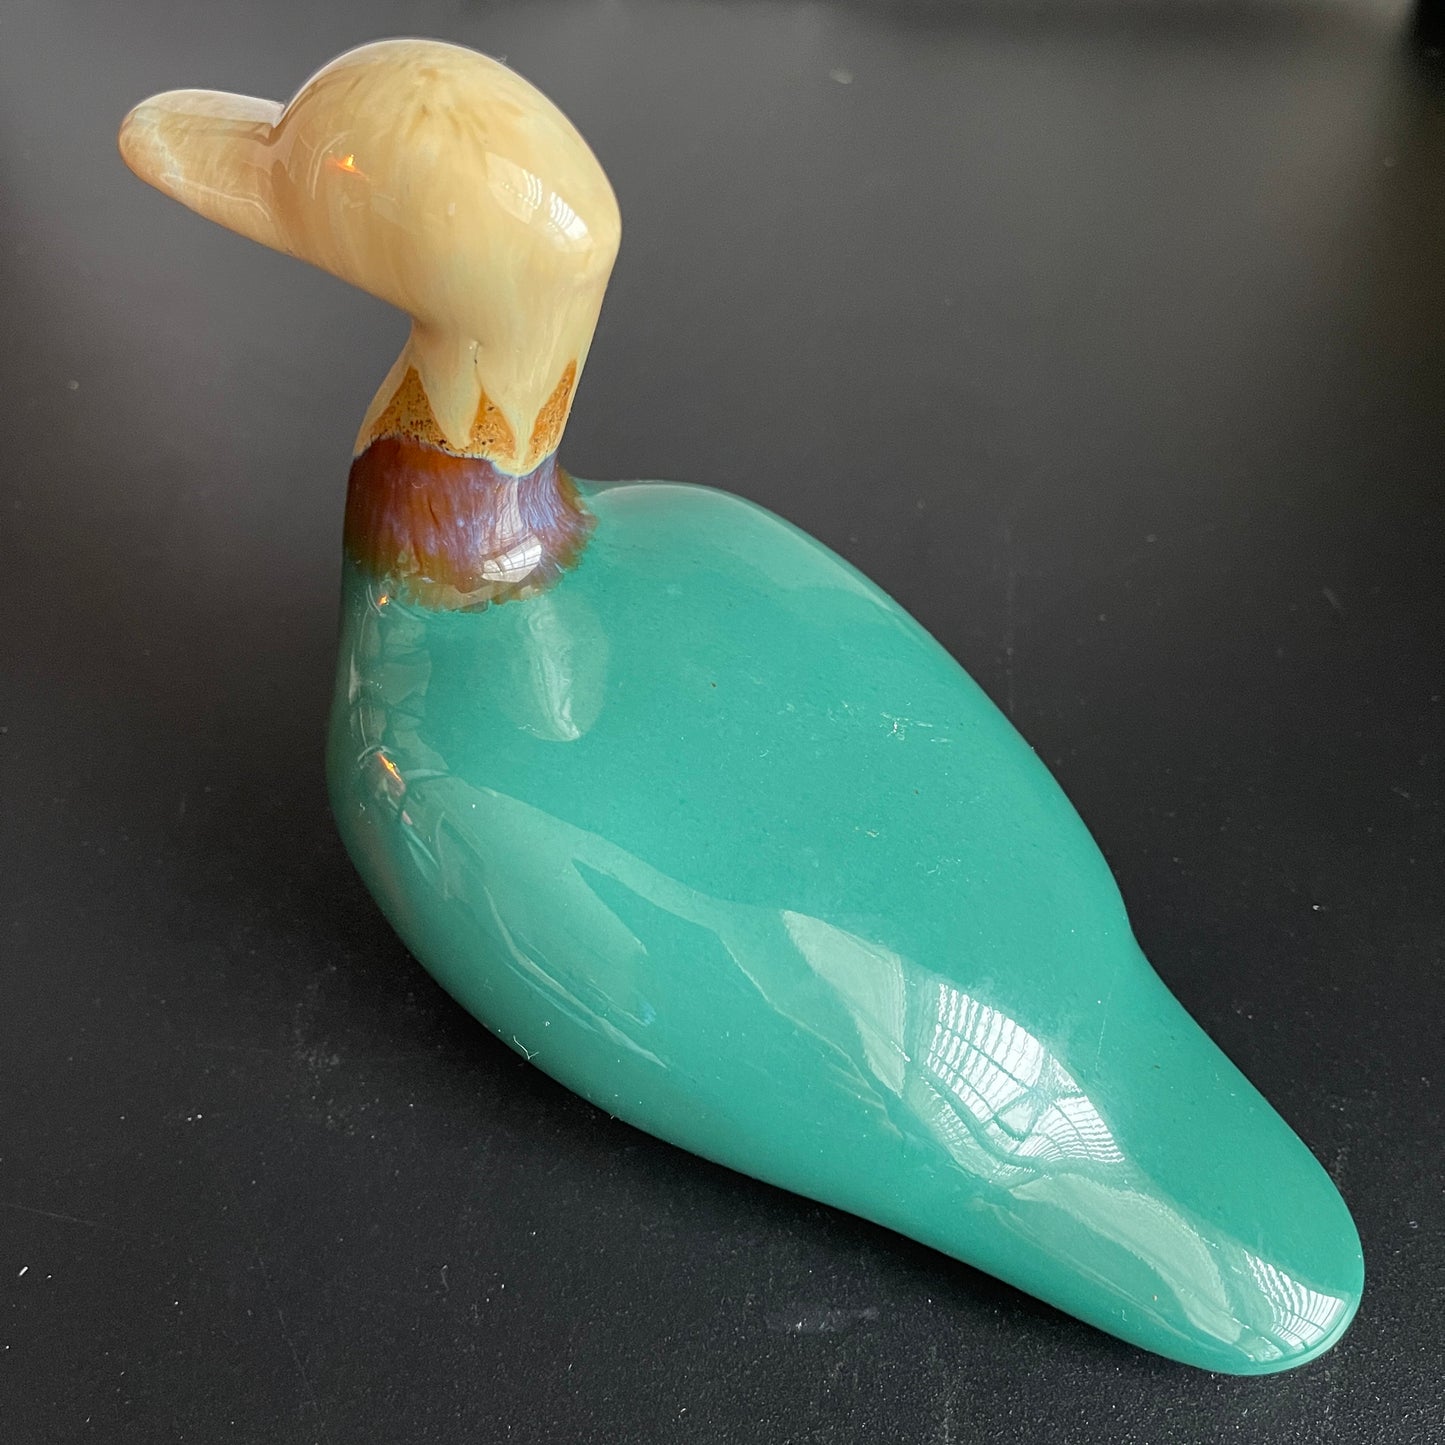 Delightful Duck Signed By Artist Vintage Porcelain Collectible Figurine